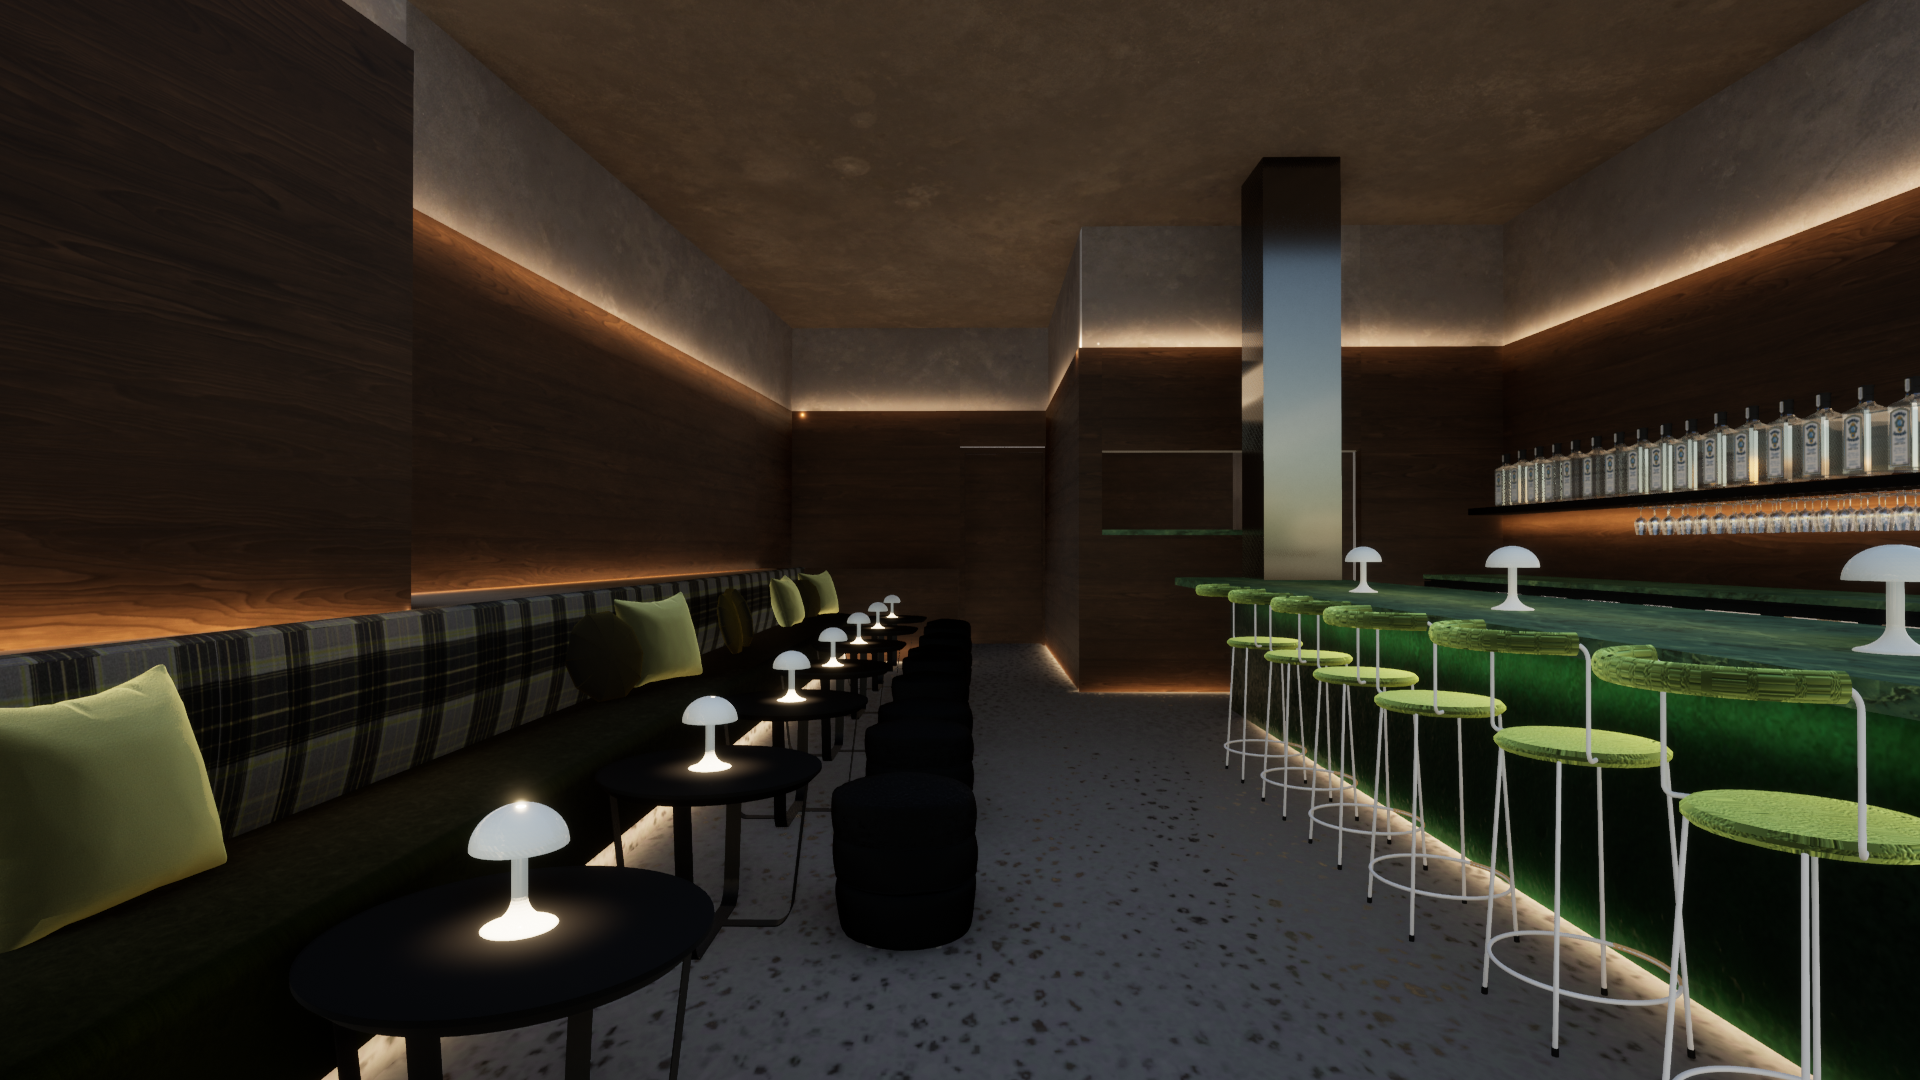 A render of what the bar will look like once it opens. Image: Supplied